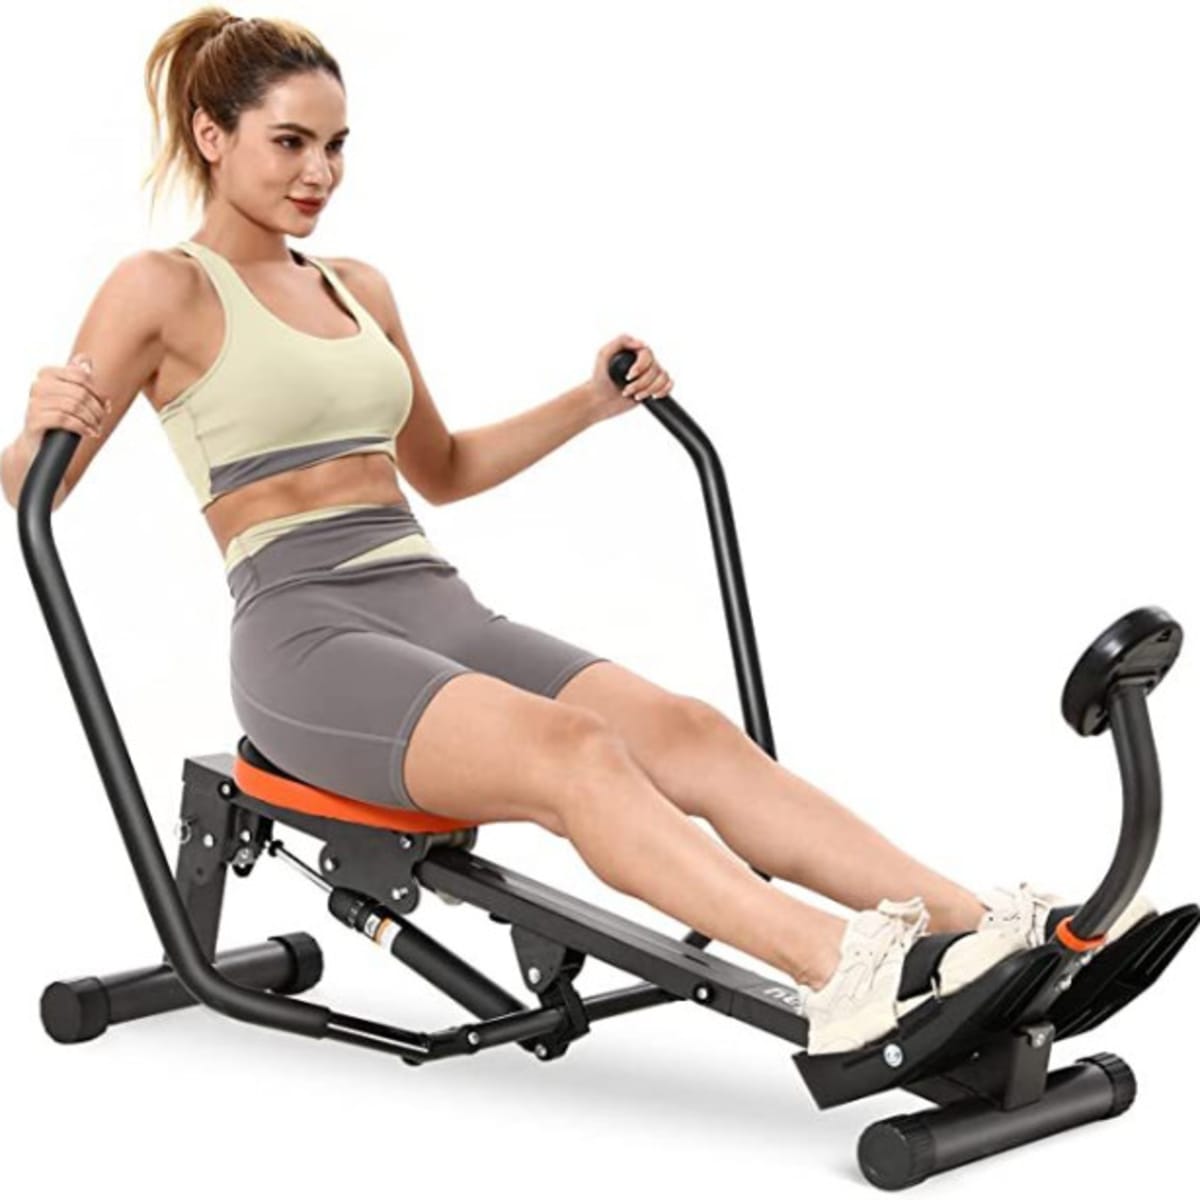 The 6 Best Hydraulic Rowing Machines of 2023